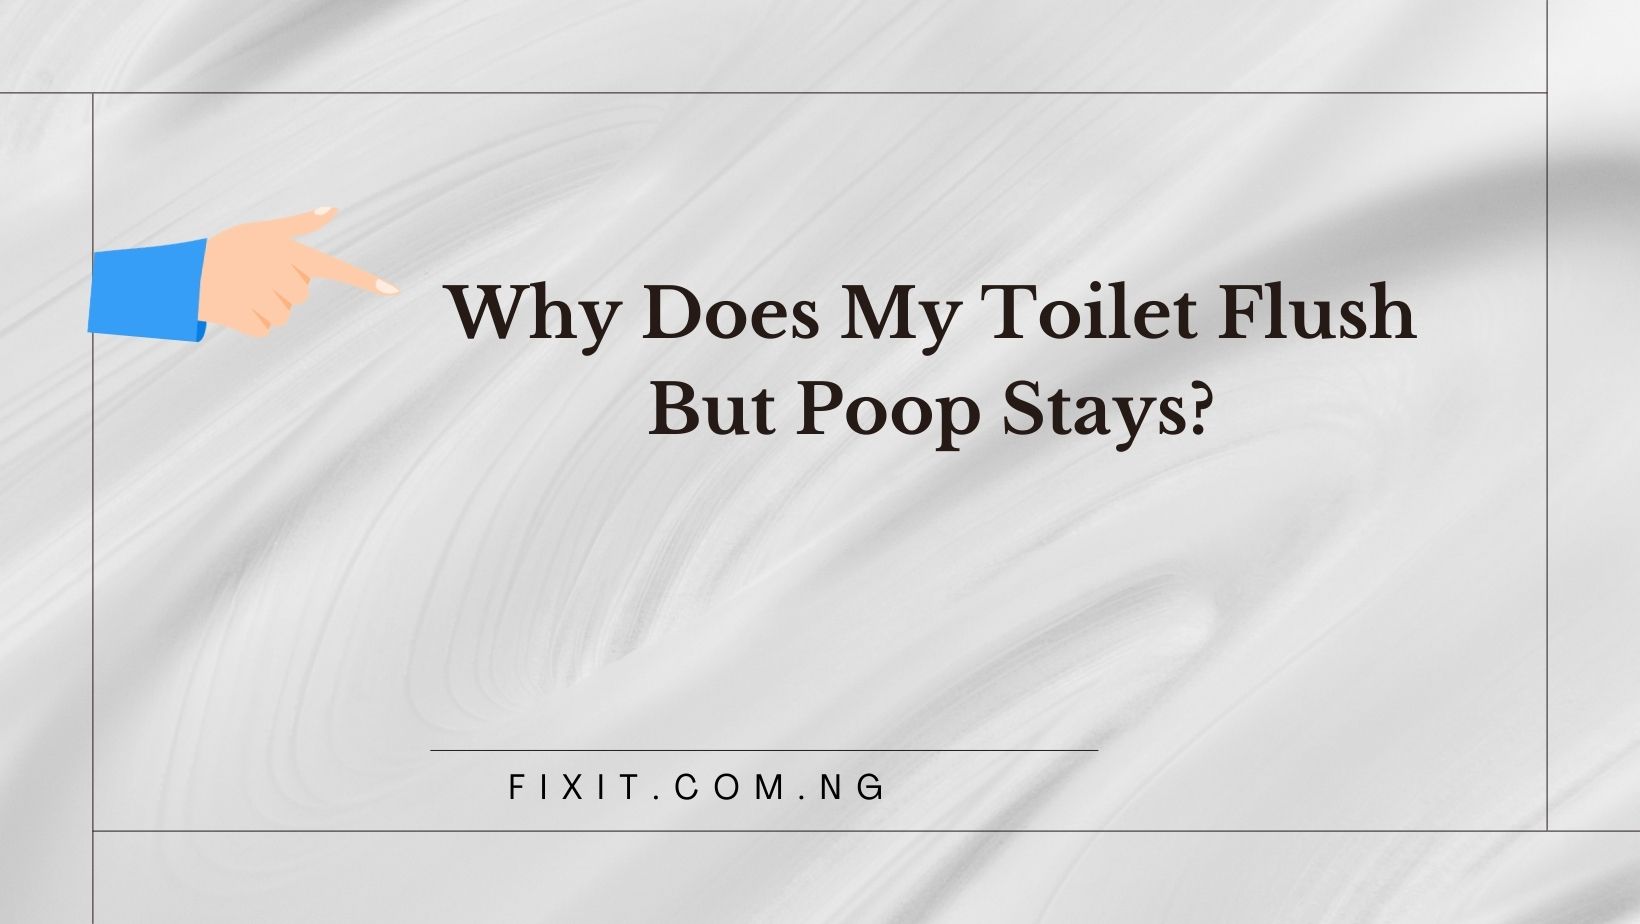 my toilet flushes but poop stays